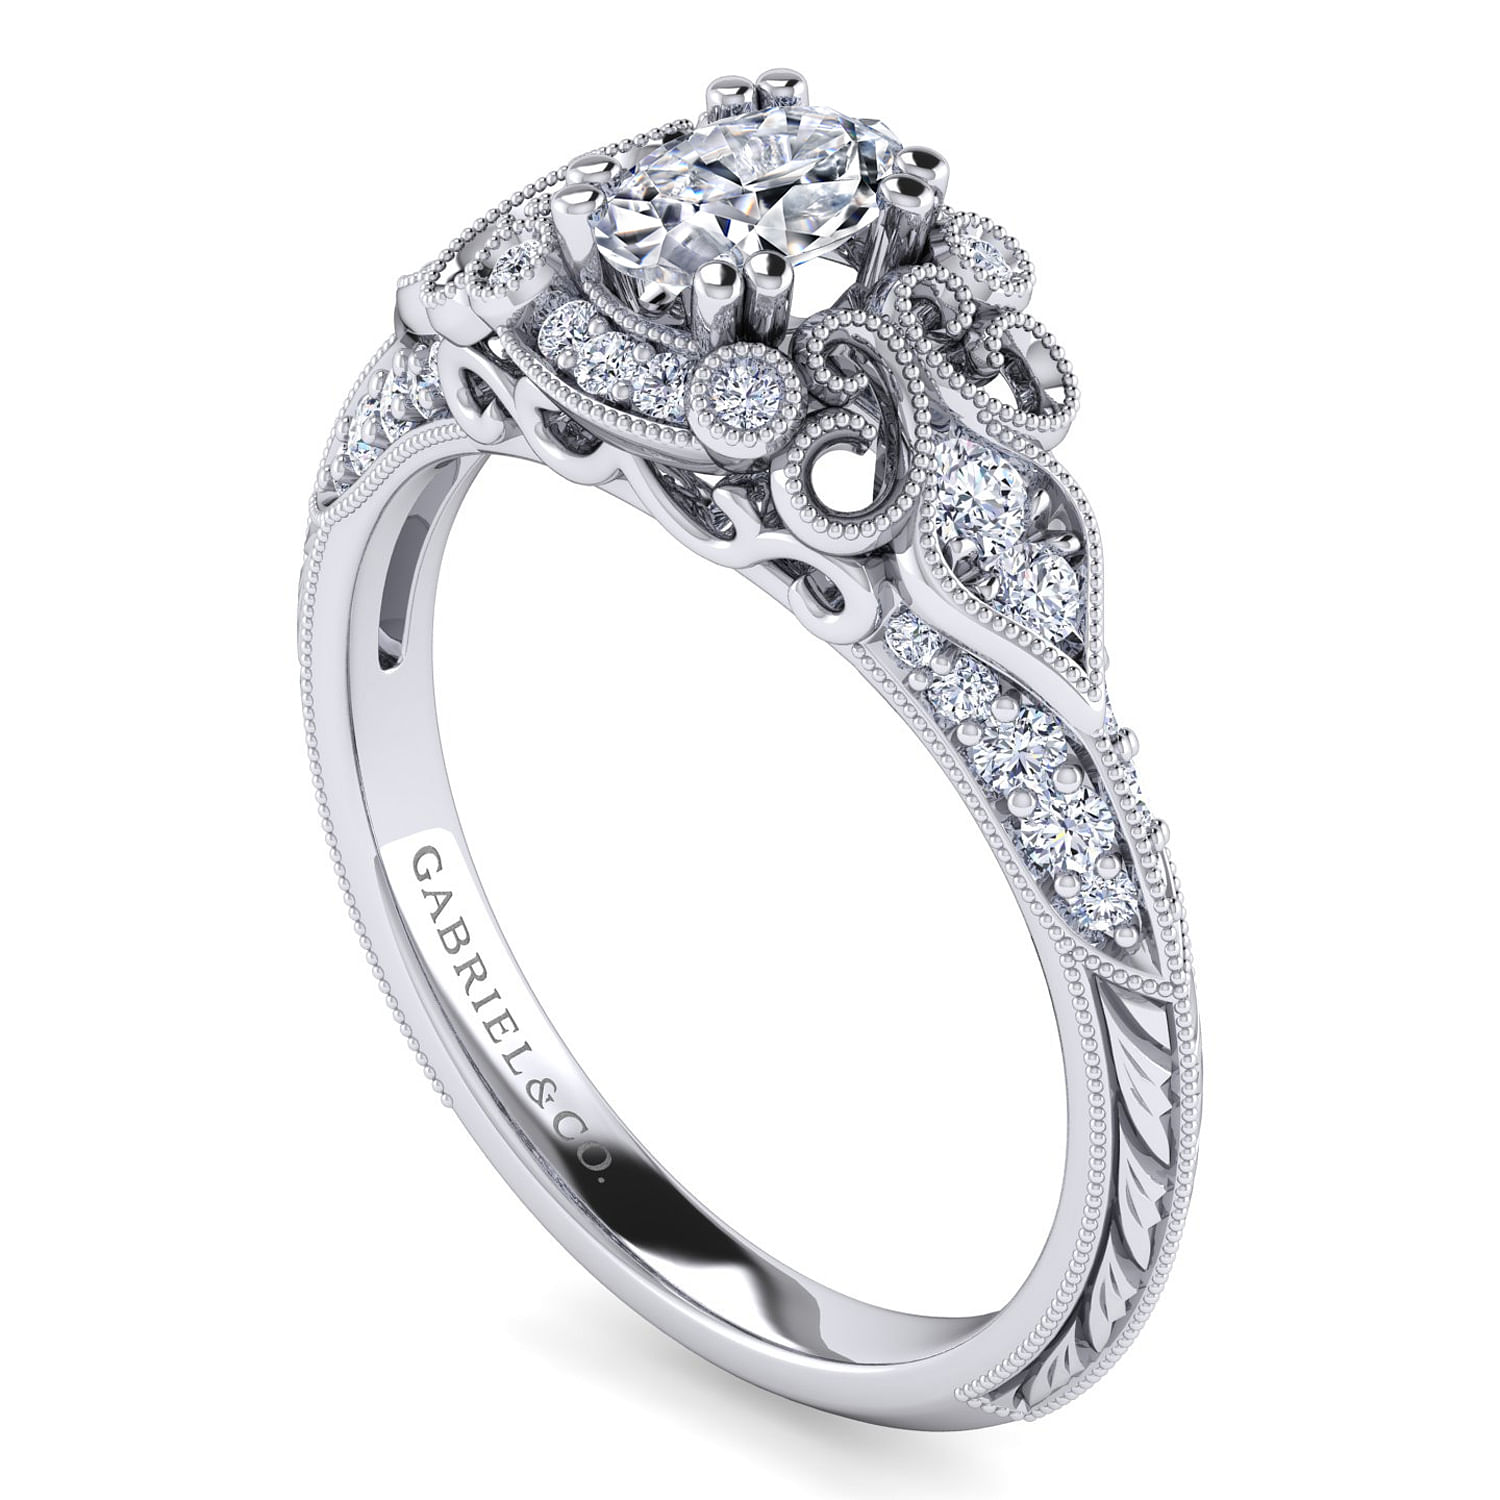 Unique 14K White Gold Vintage Inspired Oval Diamond Halo Engagement Ring